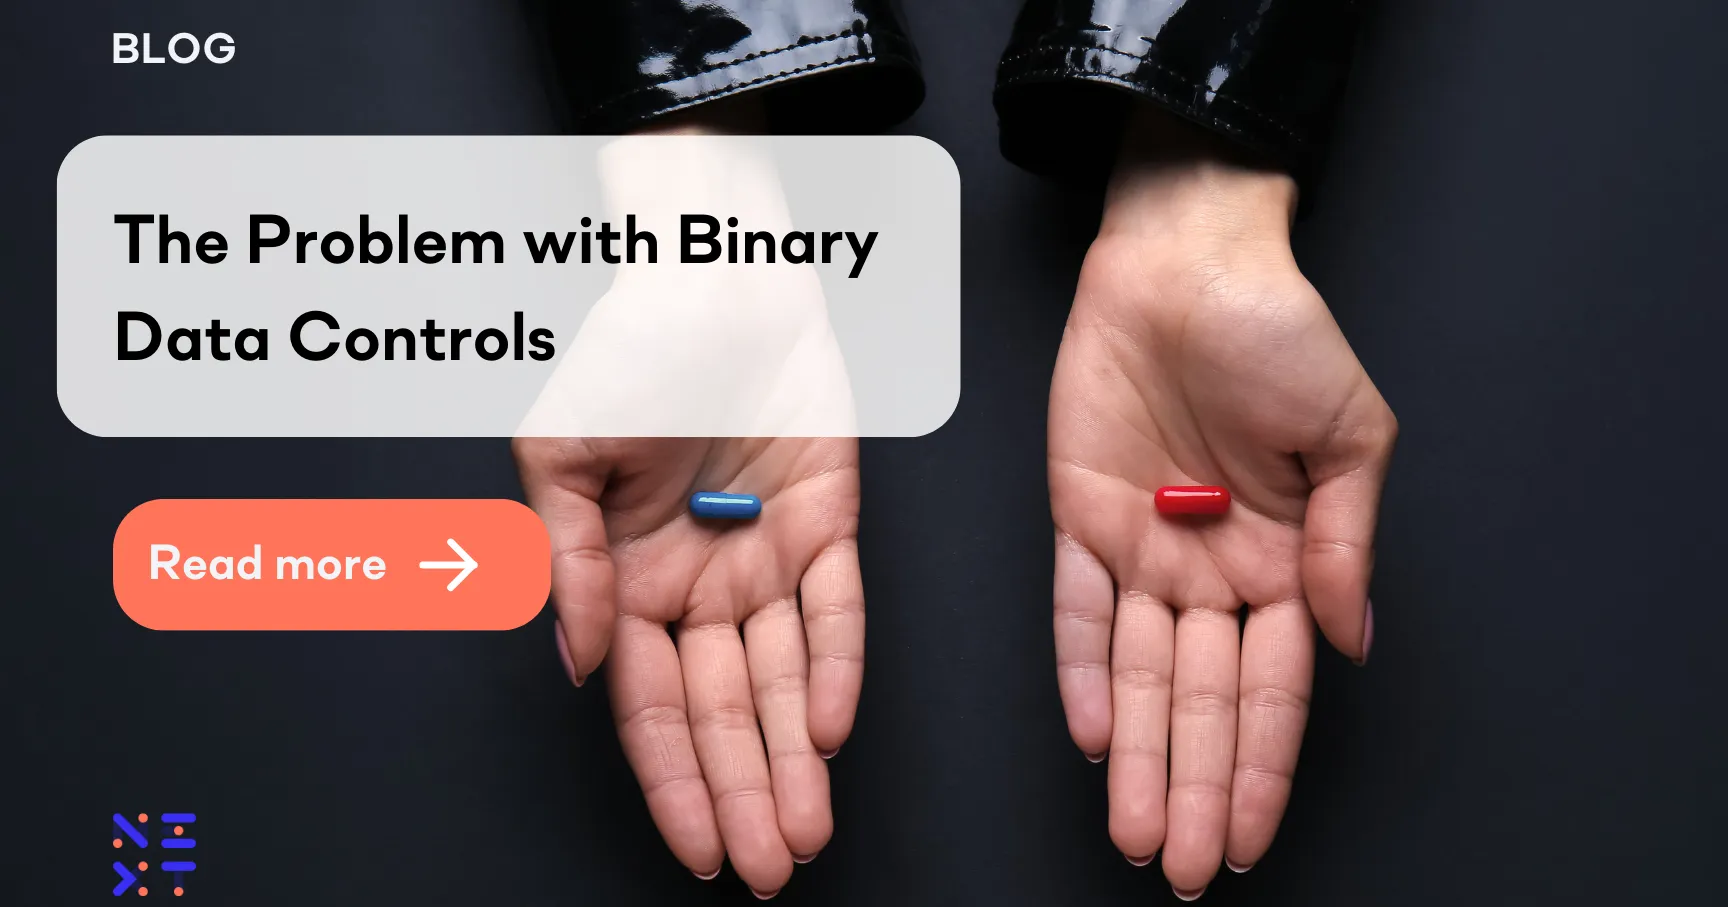 The Problem with Binary Data Controls